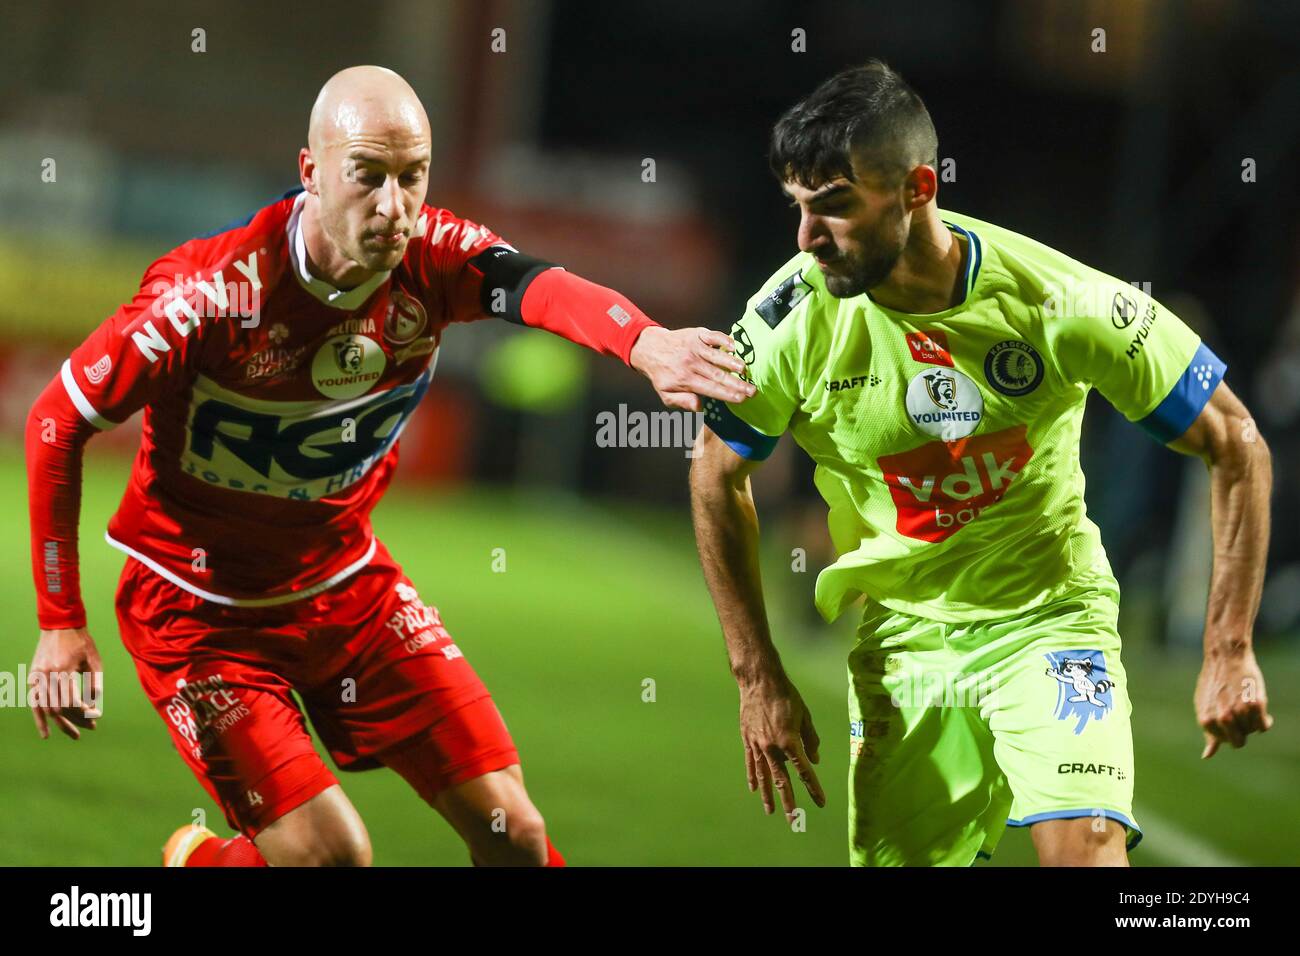 Kortrijk's Gilles Dewaele and Gent's Milad Mohammadi fight for the ball during a soccer match between KV Kortrijk and KAA Gent, Saturday 26 December 2 Stock Photo